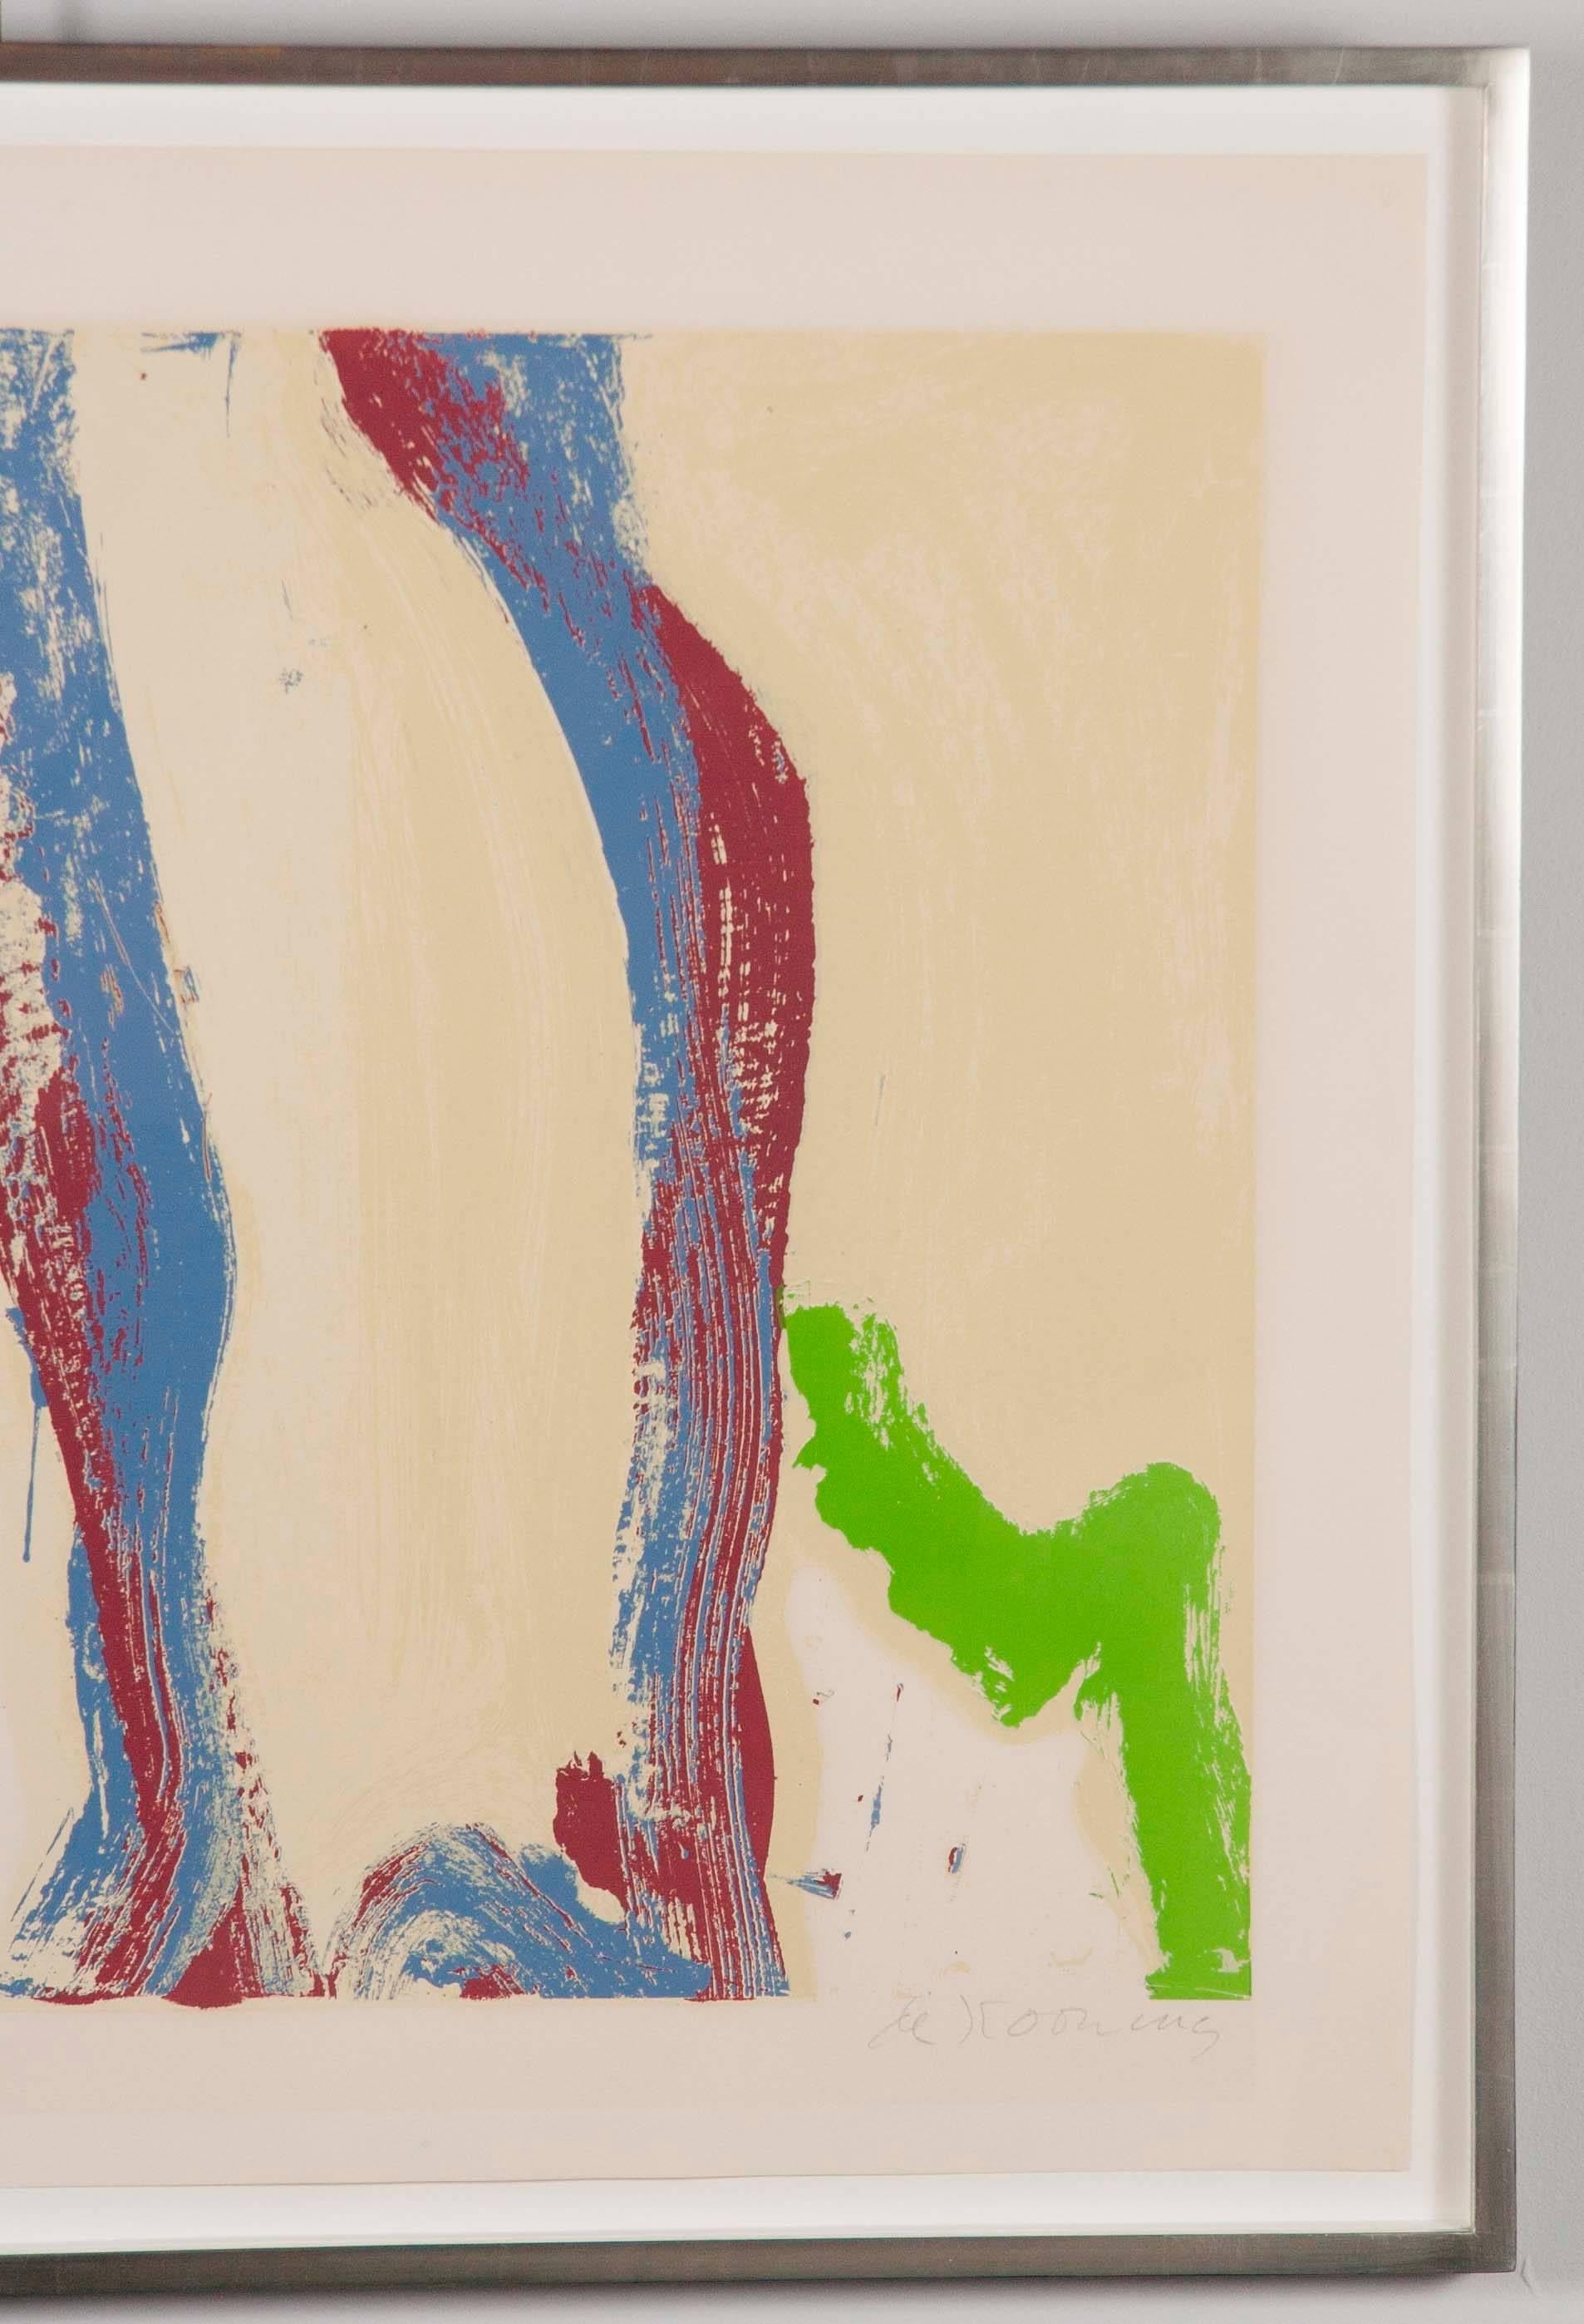 Modern Untitled Silkscreen by Abstract Expressionist Artist Willem de Kooning For Sale